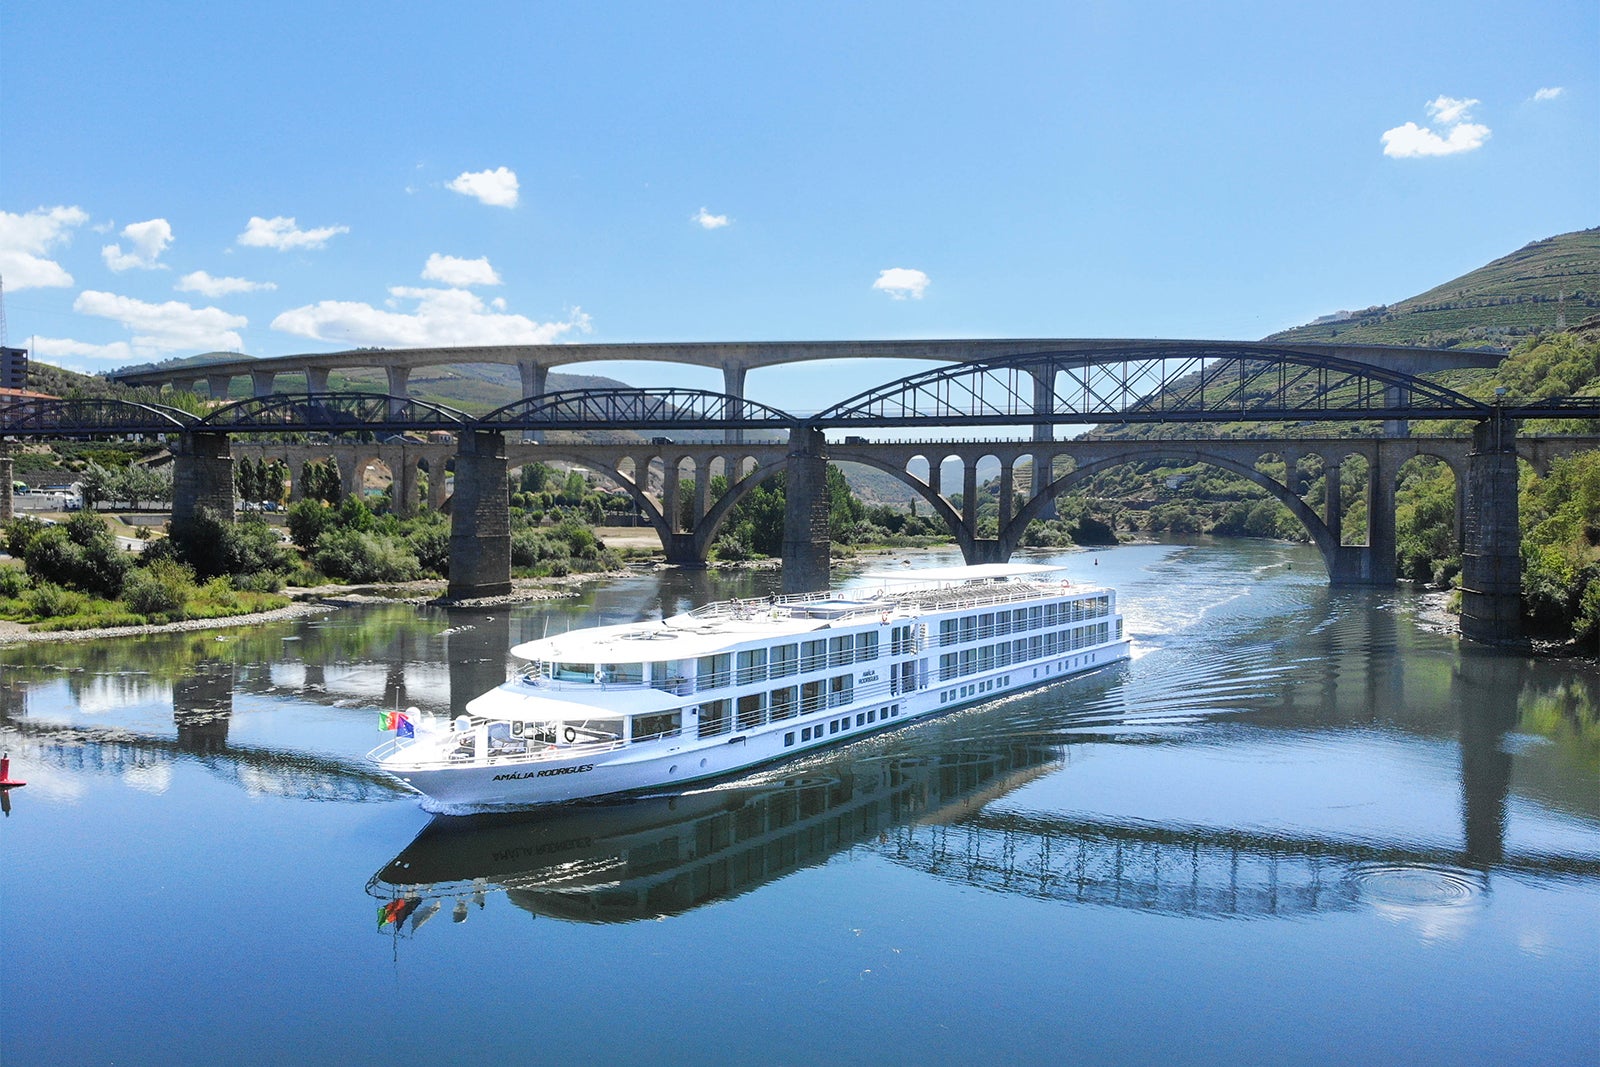 Amalia Rodrigues riverboat on the Douro River